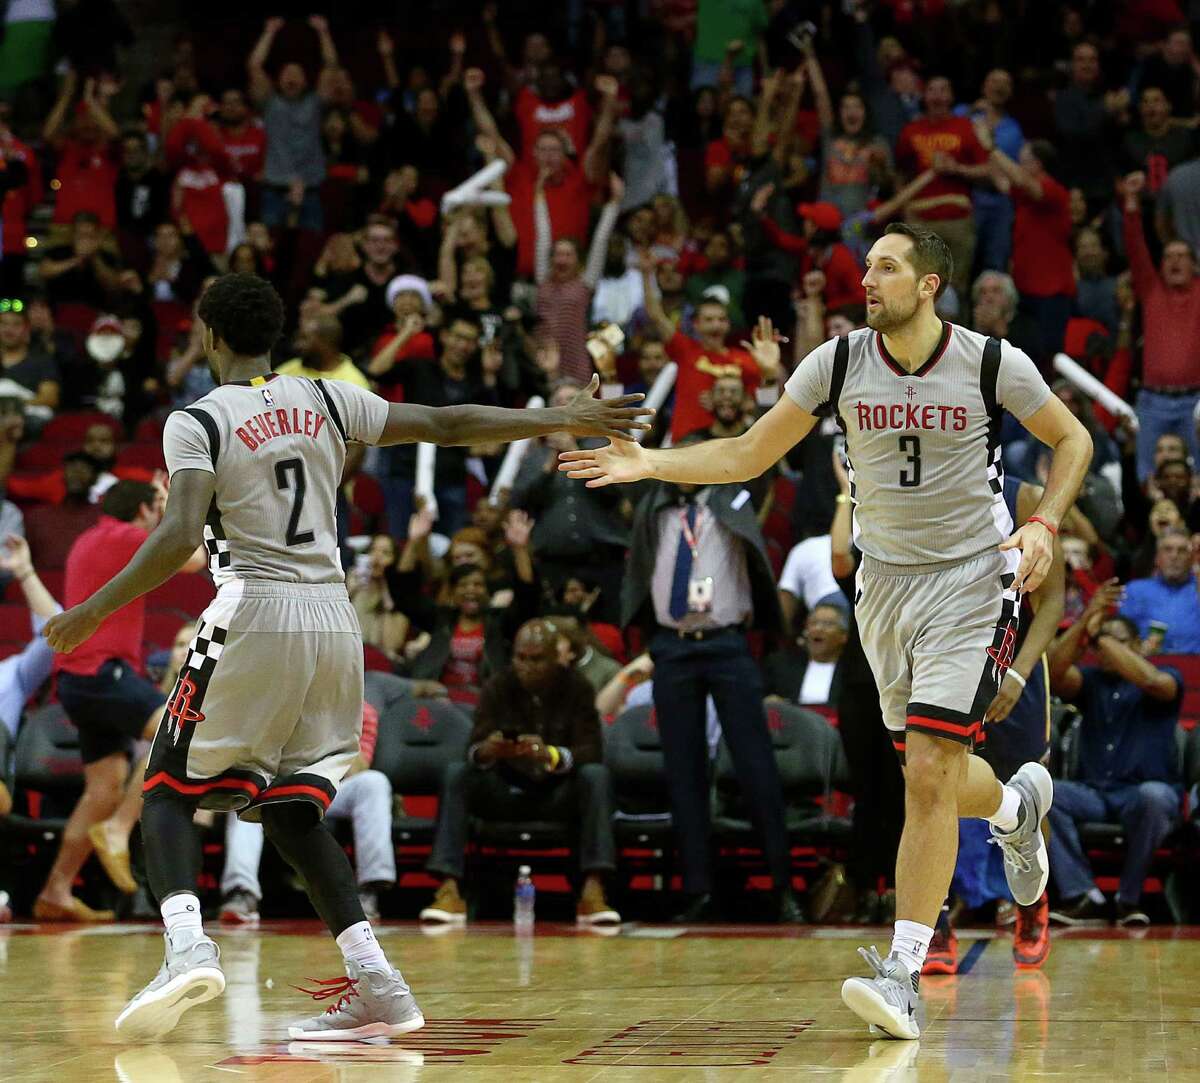 Rockets forward Ryan Anderson, right, celebrates with guard Pat Beverley after making a 3-point shot. Anderson had two of the Rockets' NBA-record 24 3-pointers on 61 attempts in the win over the Pelicans.